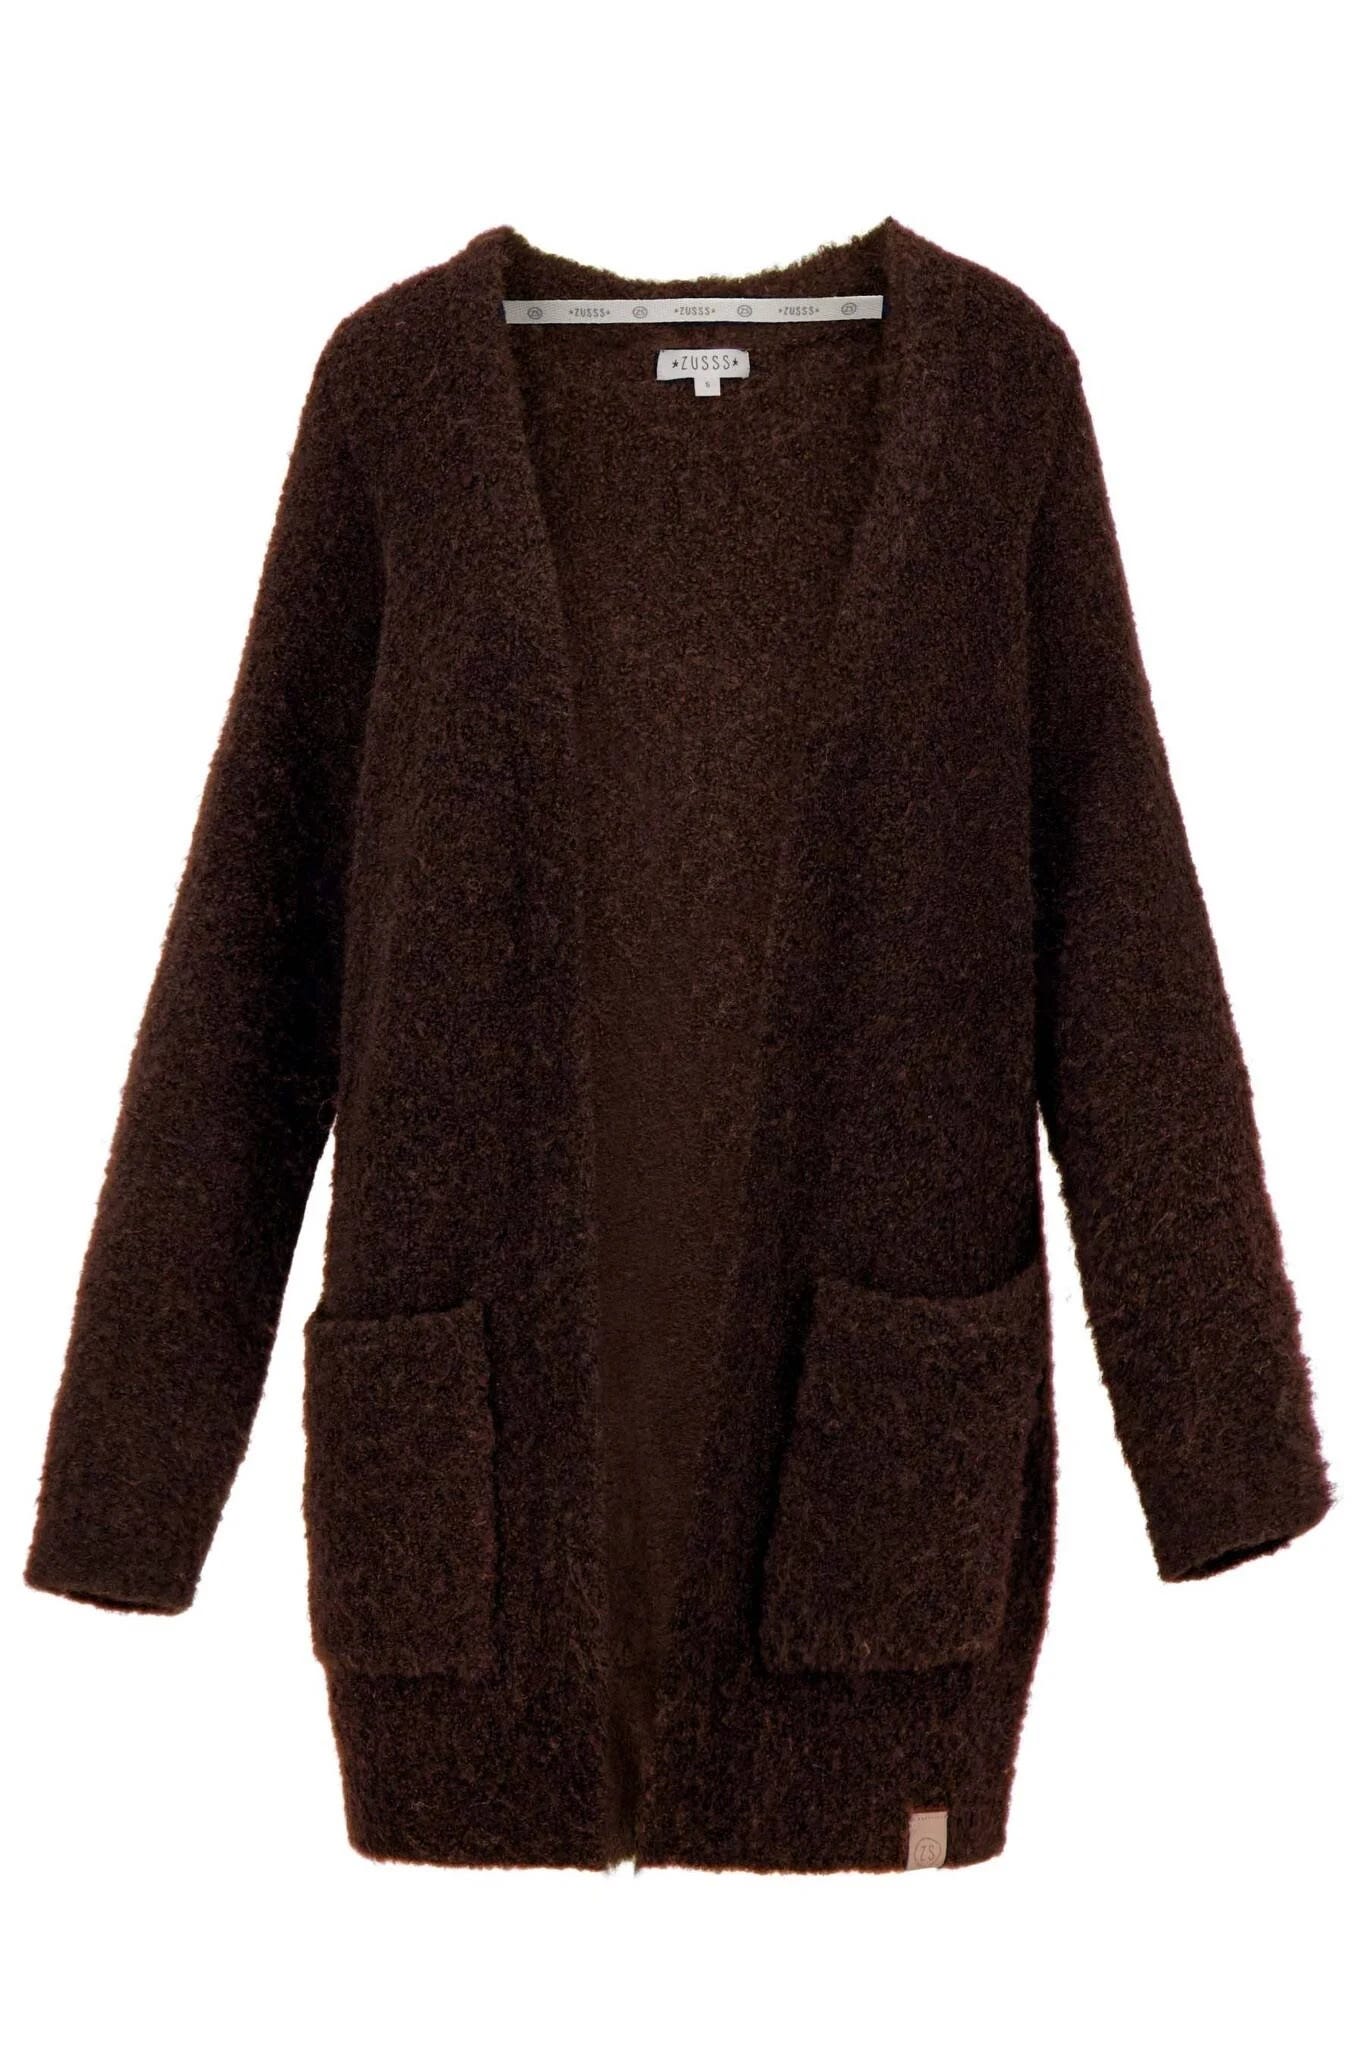 Cozy Brown Knitted Vest with Phone Pocket | Image